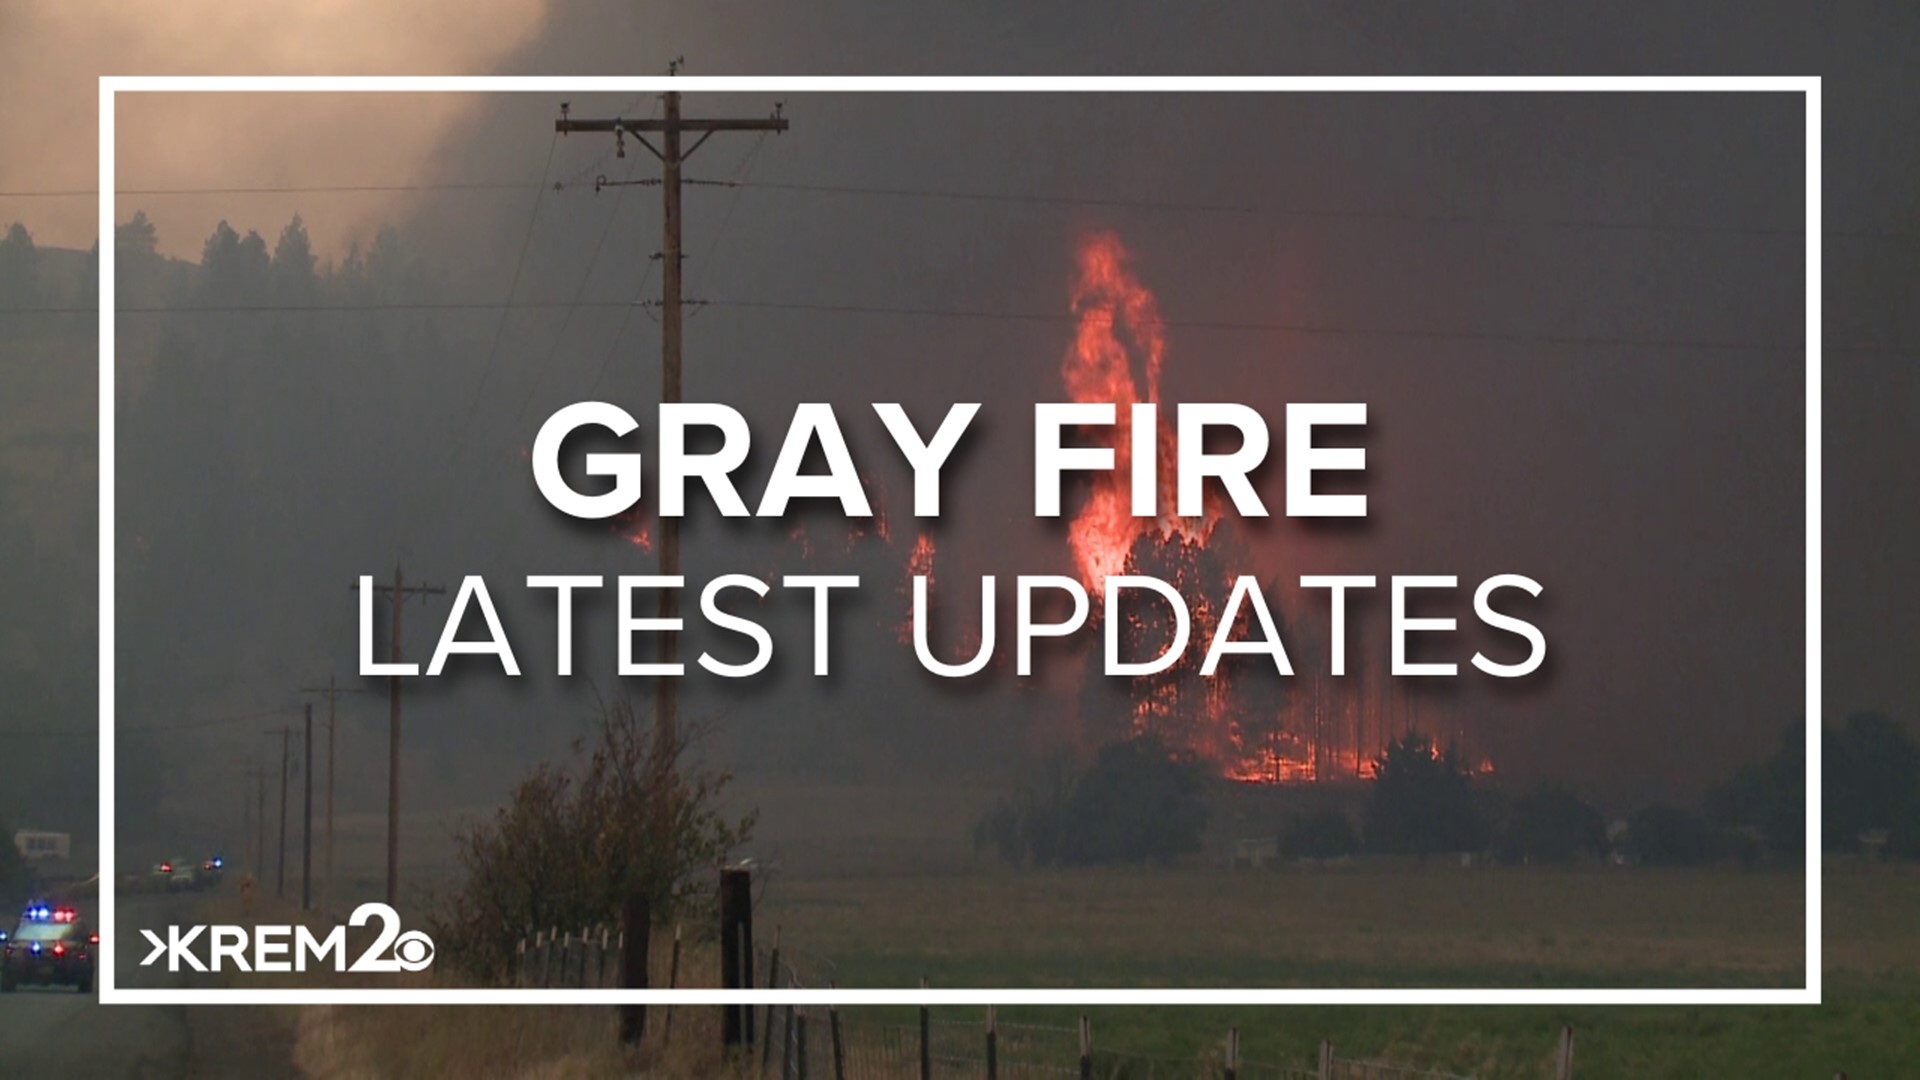 The fire is estimated to be 3,000 acres at this time. WSDOT East says I-90 is closed at milepost 275/Salnave Road and milepost 270 at Four Lakes.